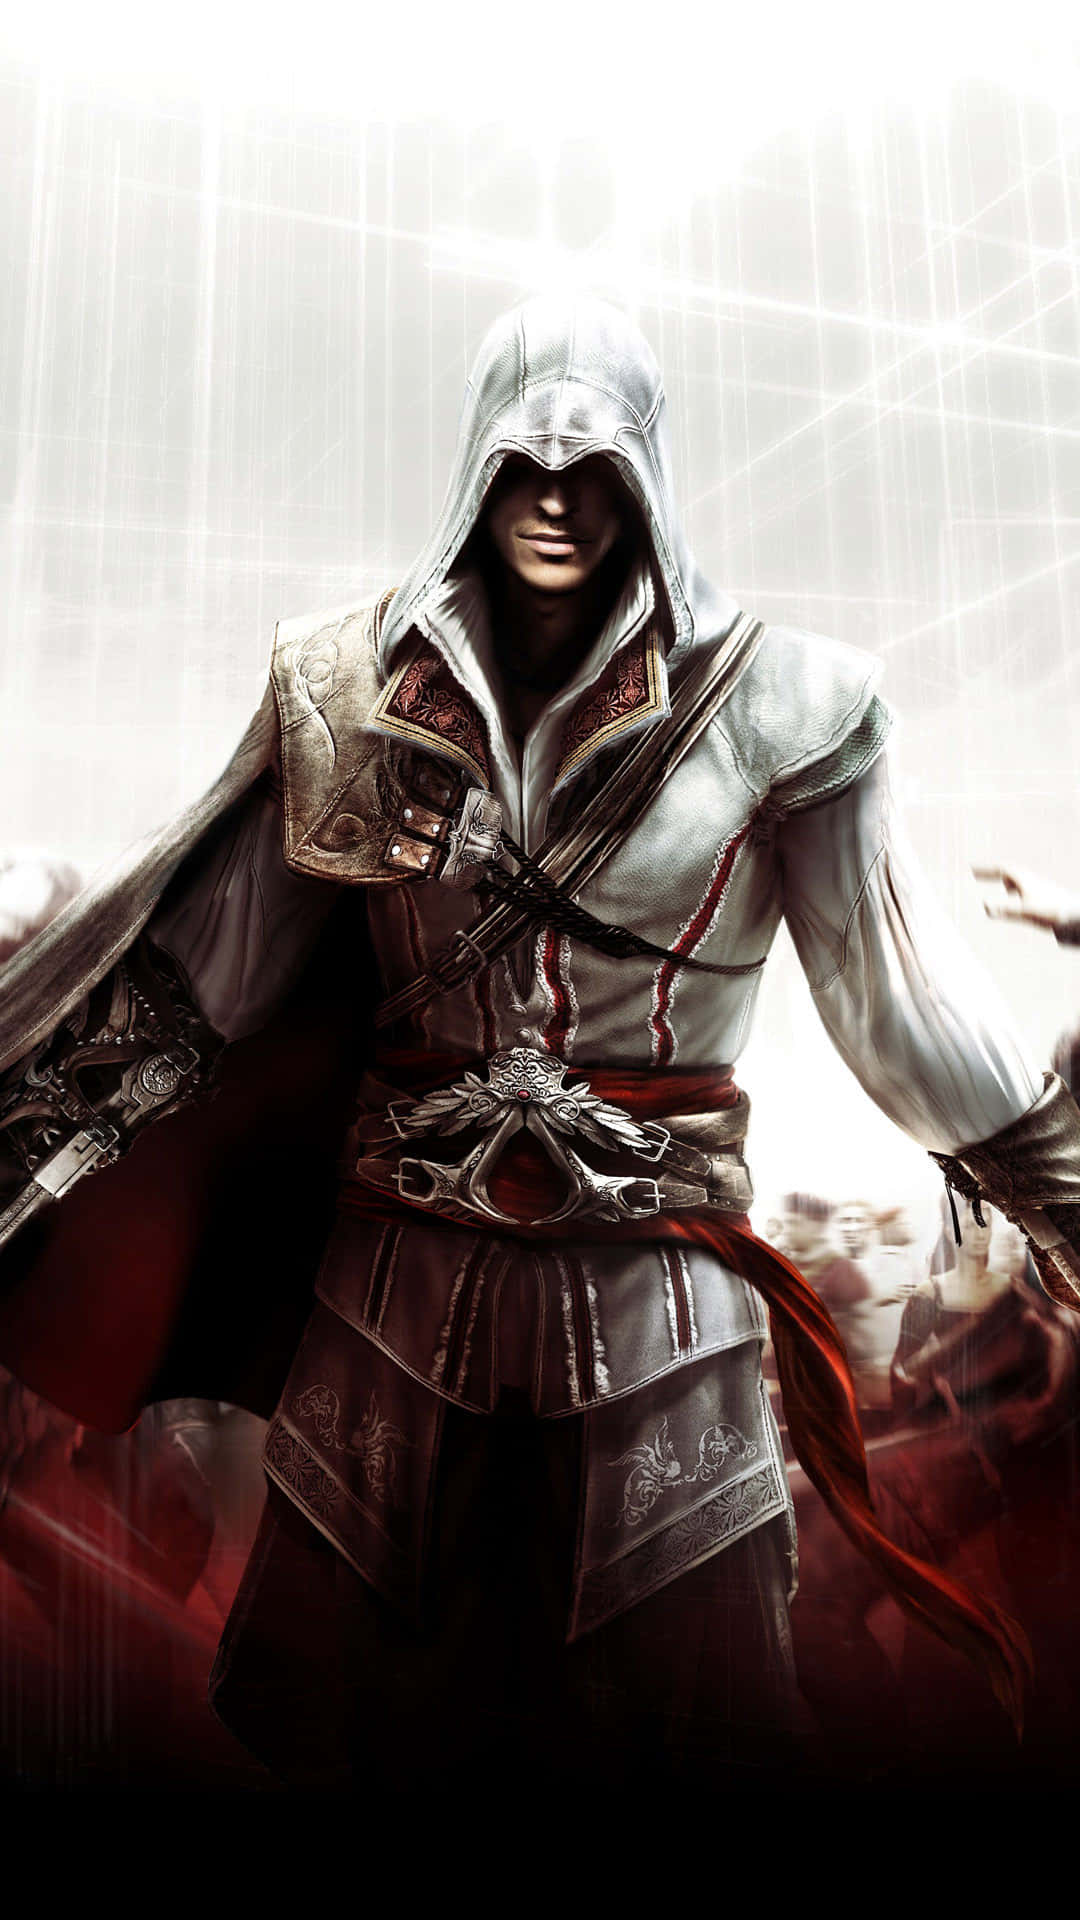 Experience the thrilling world of Assassins Creed on your iPhone Wallpaper